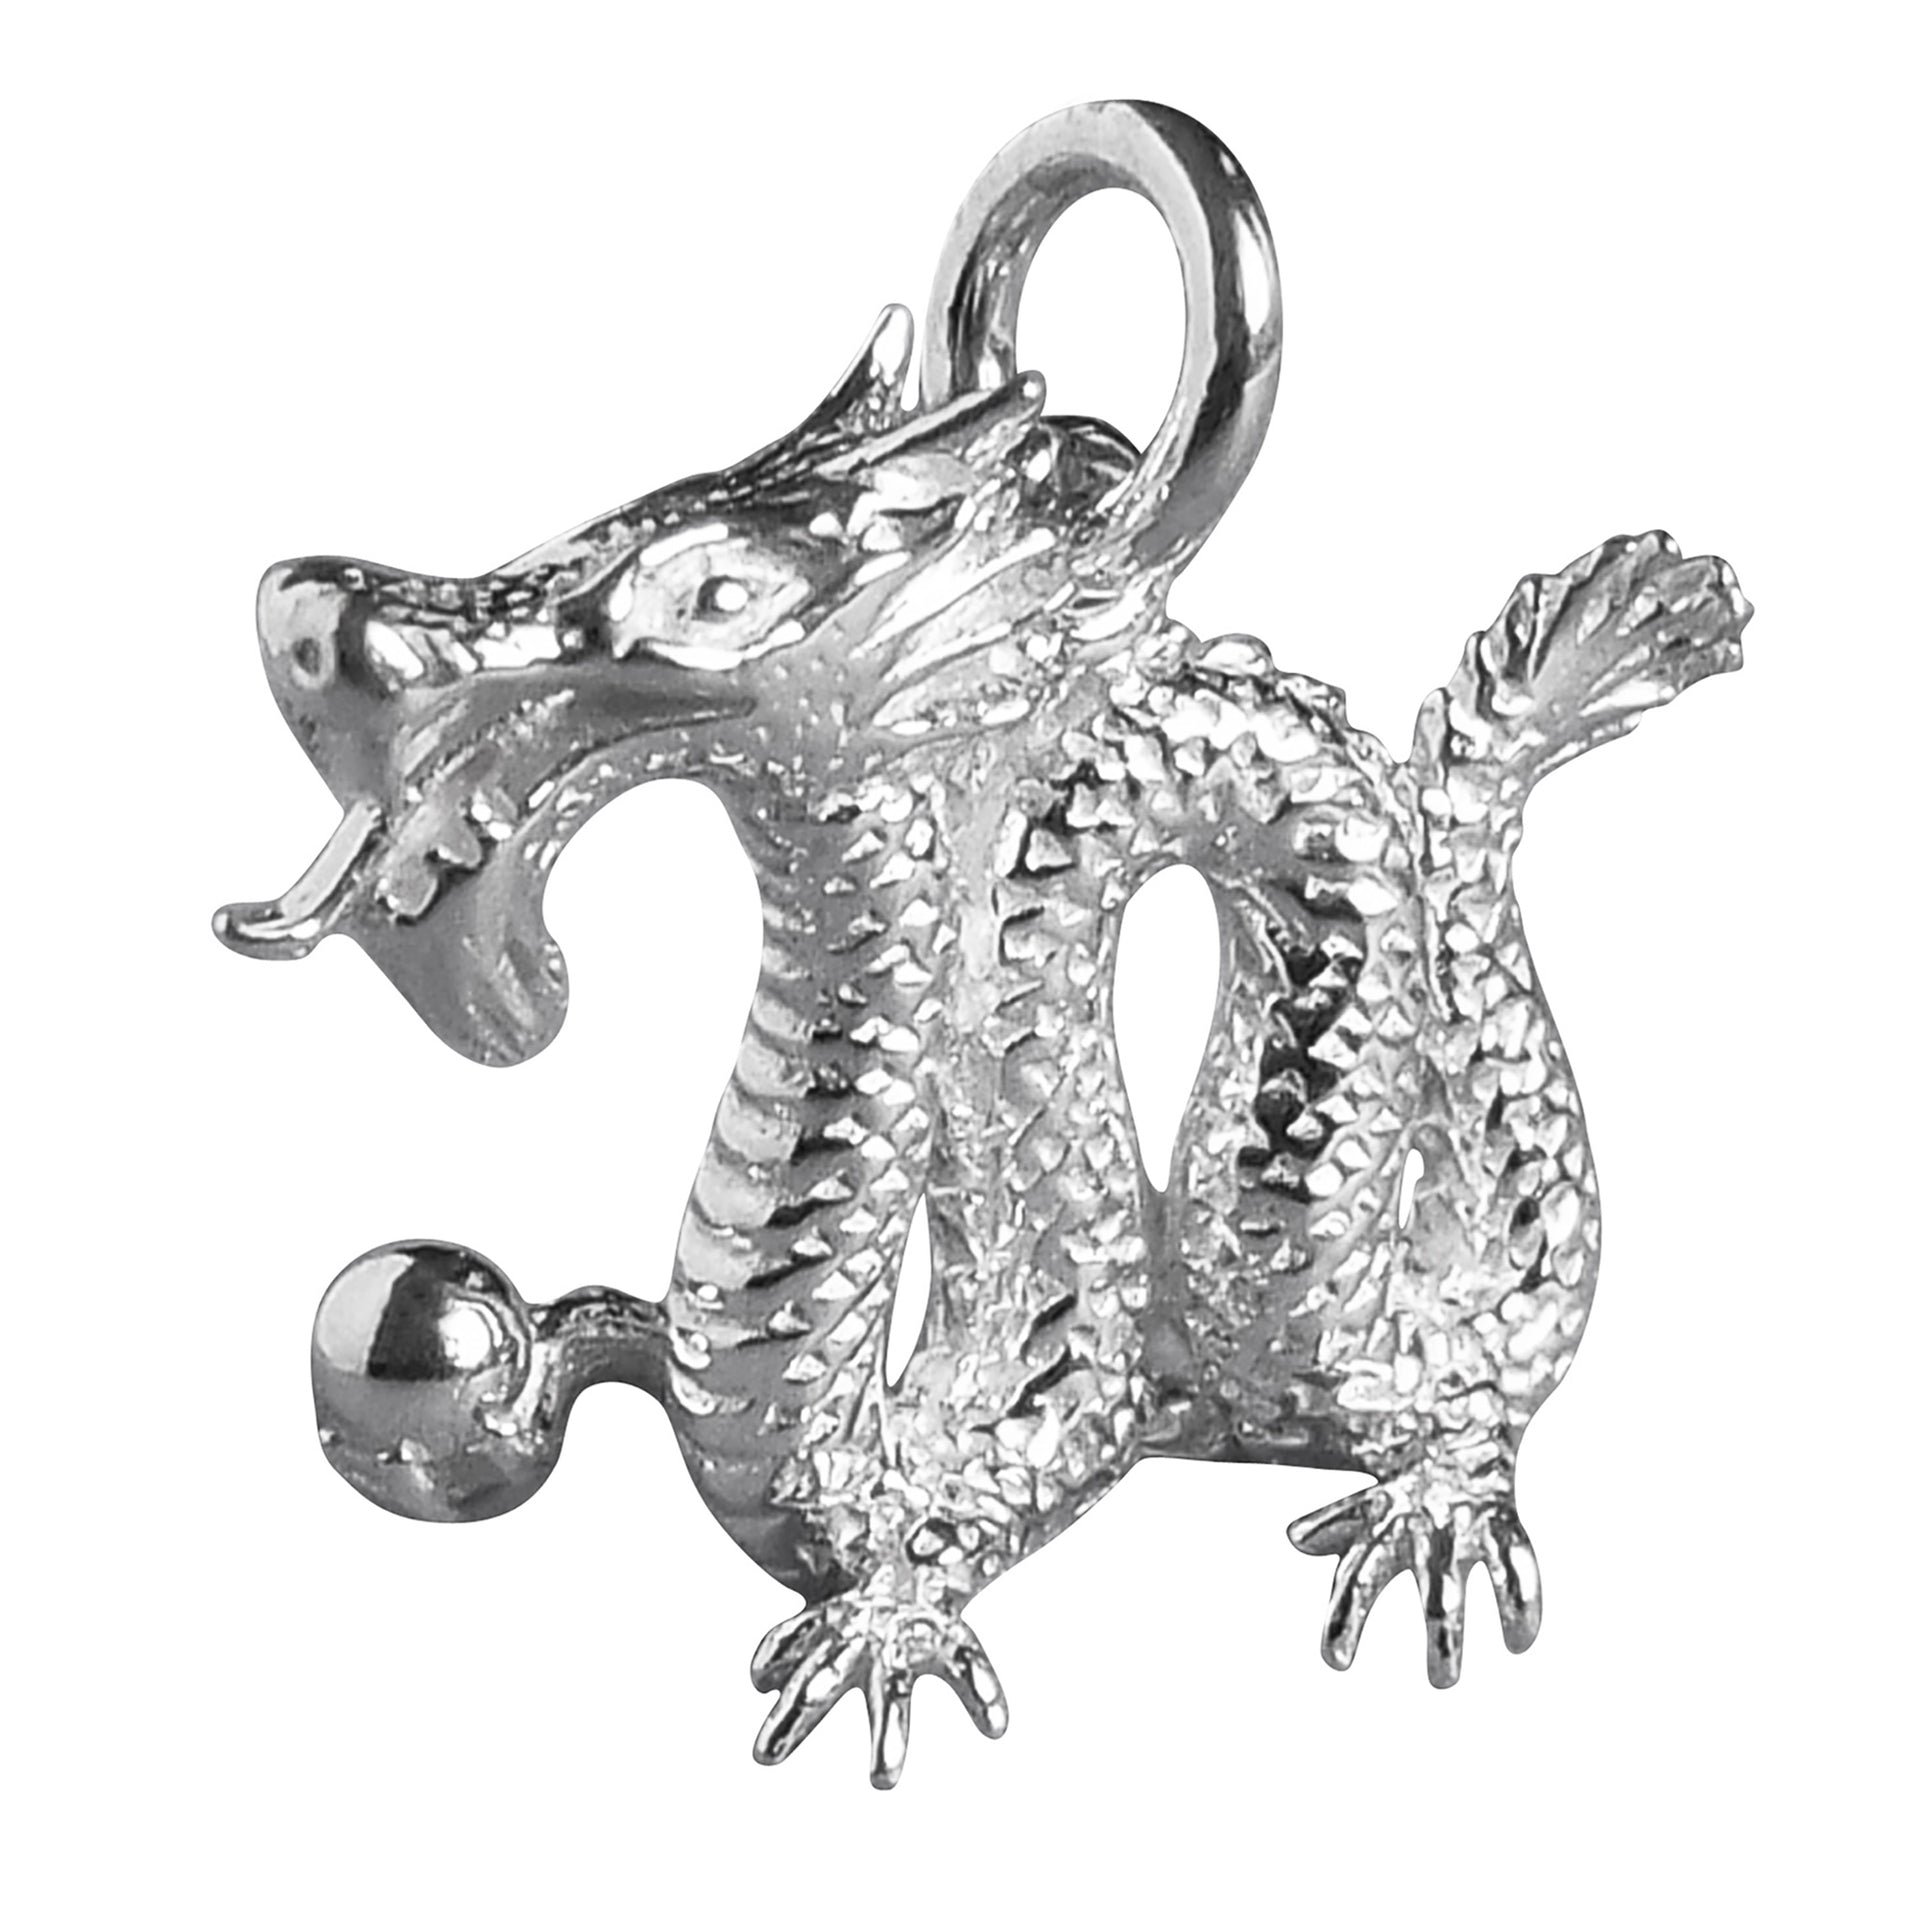 JewelrySupply Dragon Charm 21x14mm Antique Silver Plated (1-Pc)